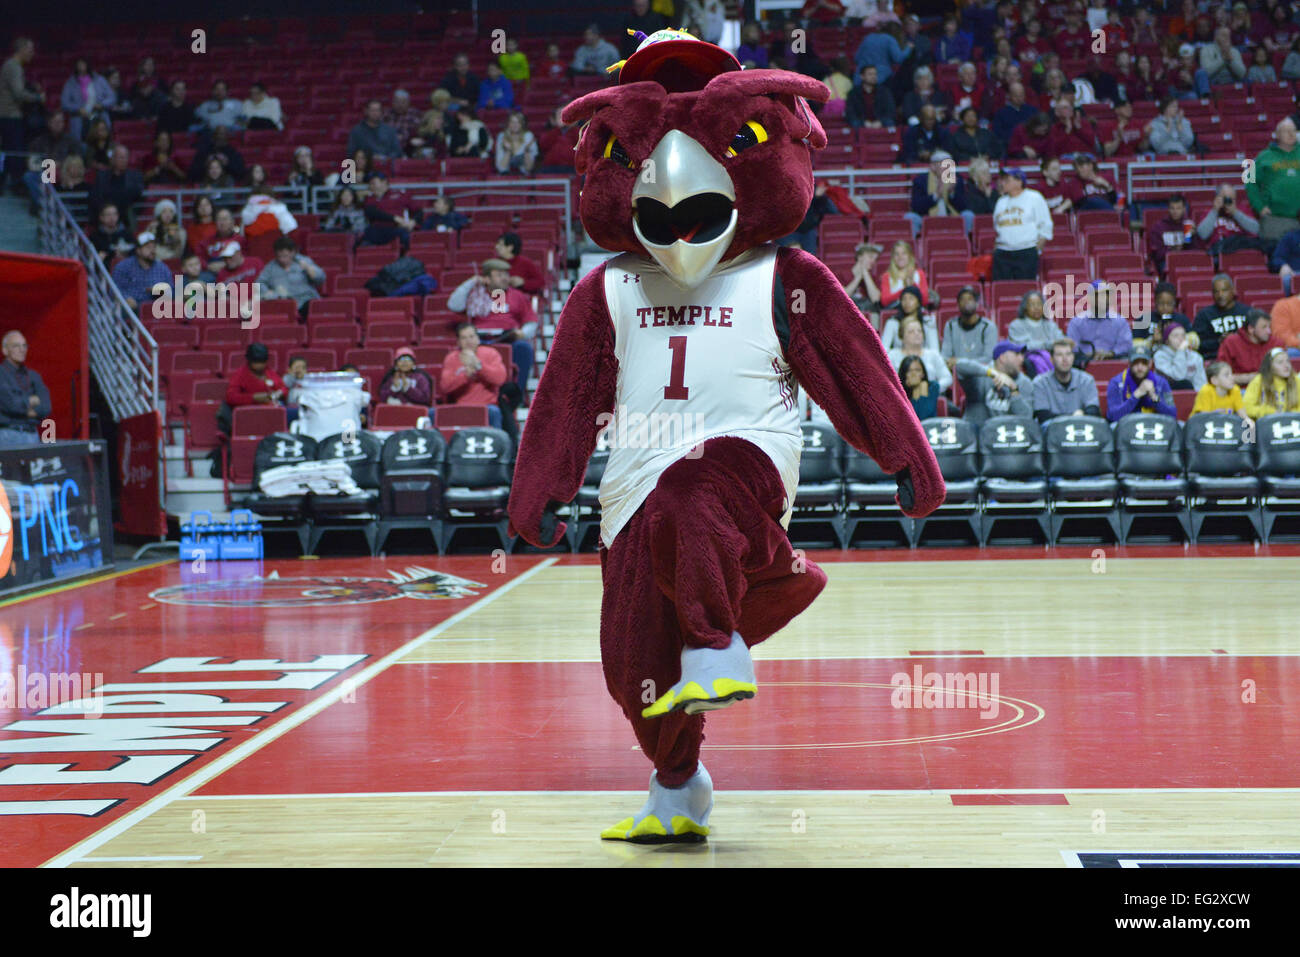 Philadelphia, PA, US. 14th Feb, 2015. HOOTER, the Temple mascot takes the court on his birthday during the basketball game between the ECU Pirates and Temple Owls played at the Liacouras Center in Philadelphia, PA. Temple beat ECU 66-53. Credit:  Ken Inness/ZUMA Wire/Alamy Live News Stock Photo